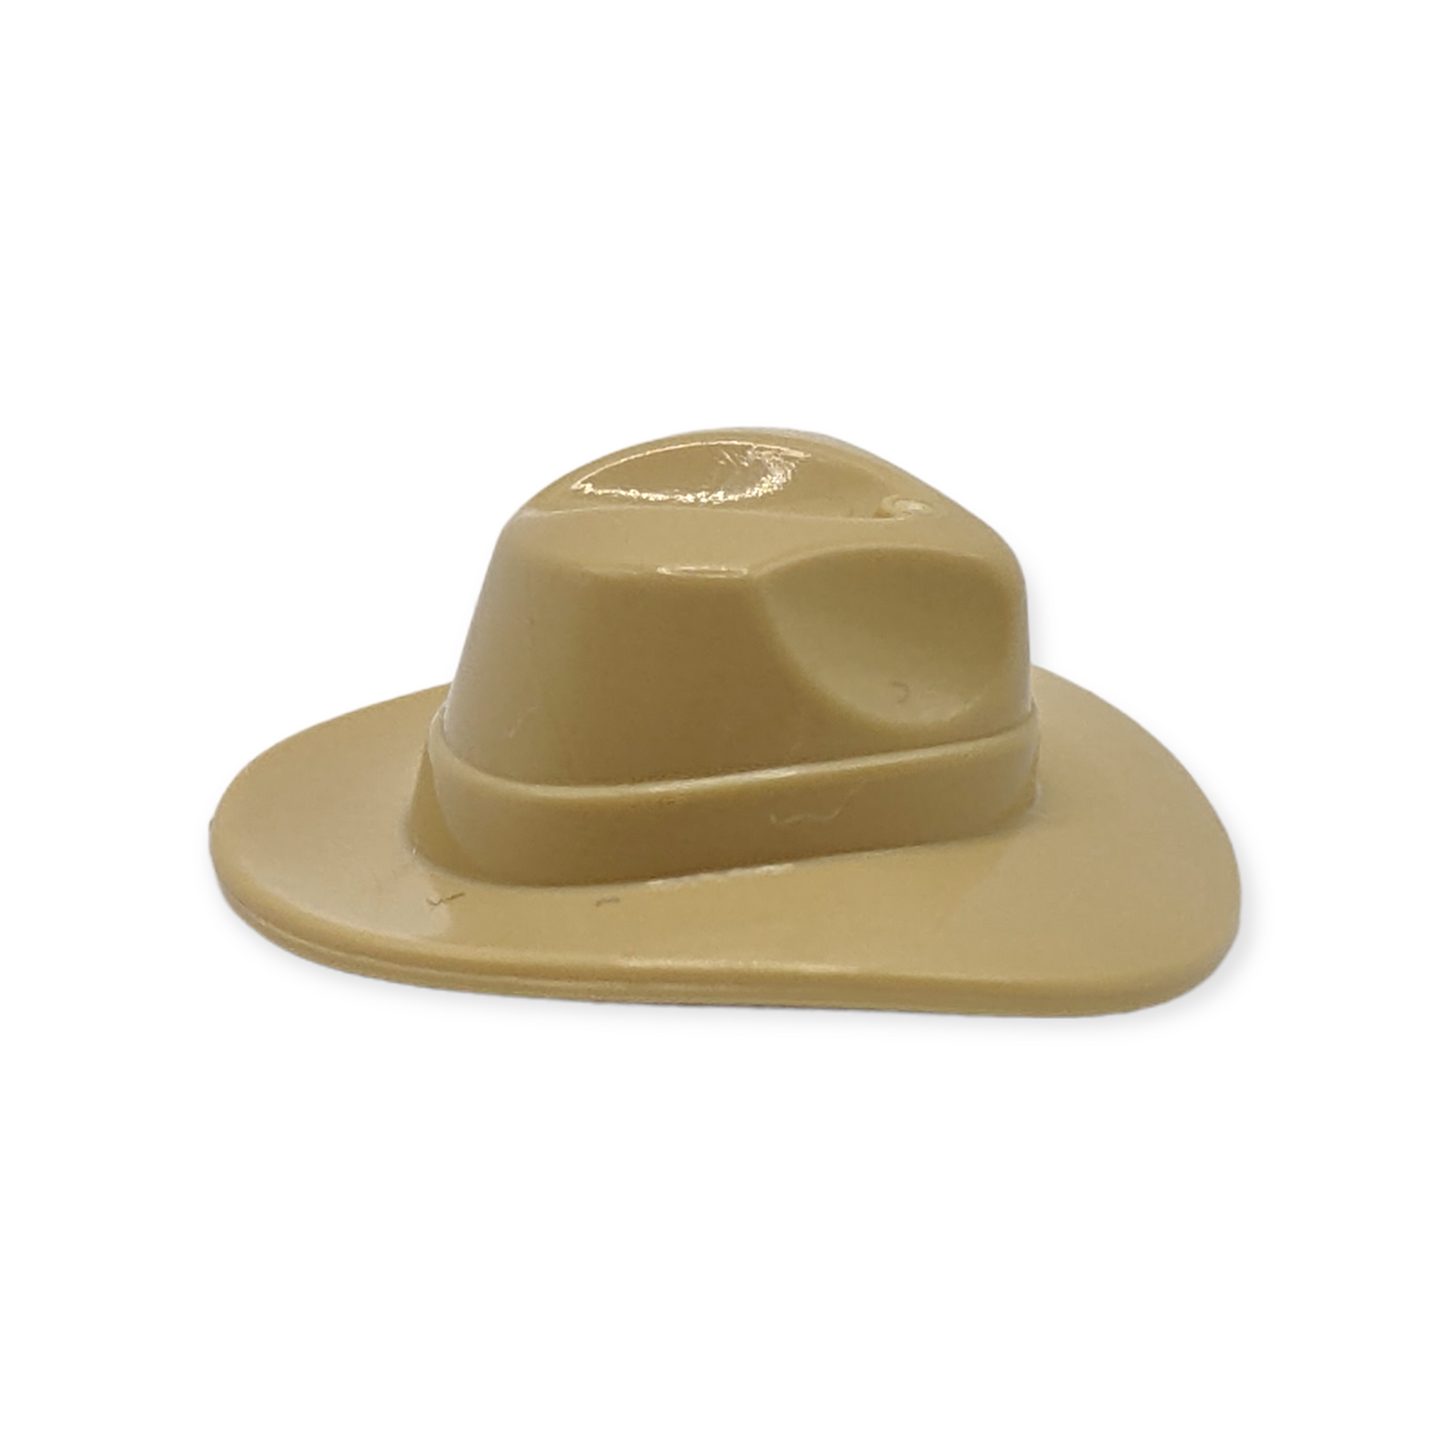 LEGO Hut - Wide Brim Outback Style in Tan